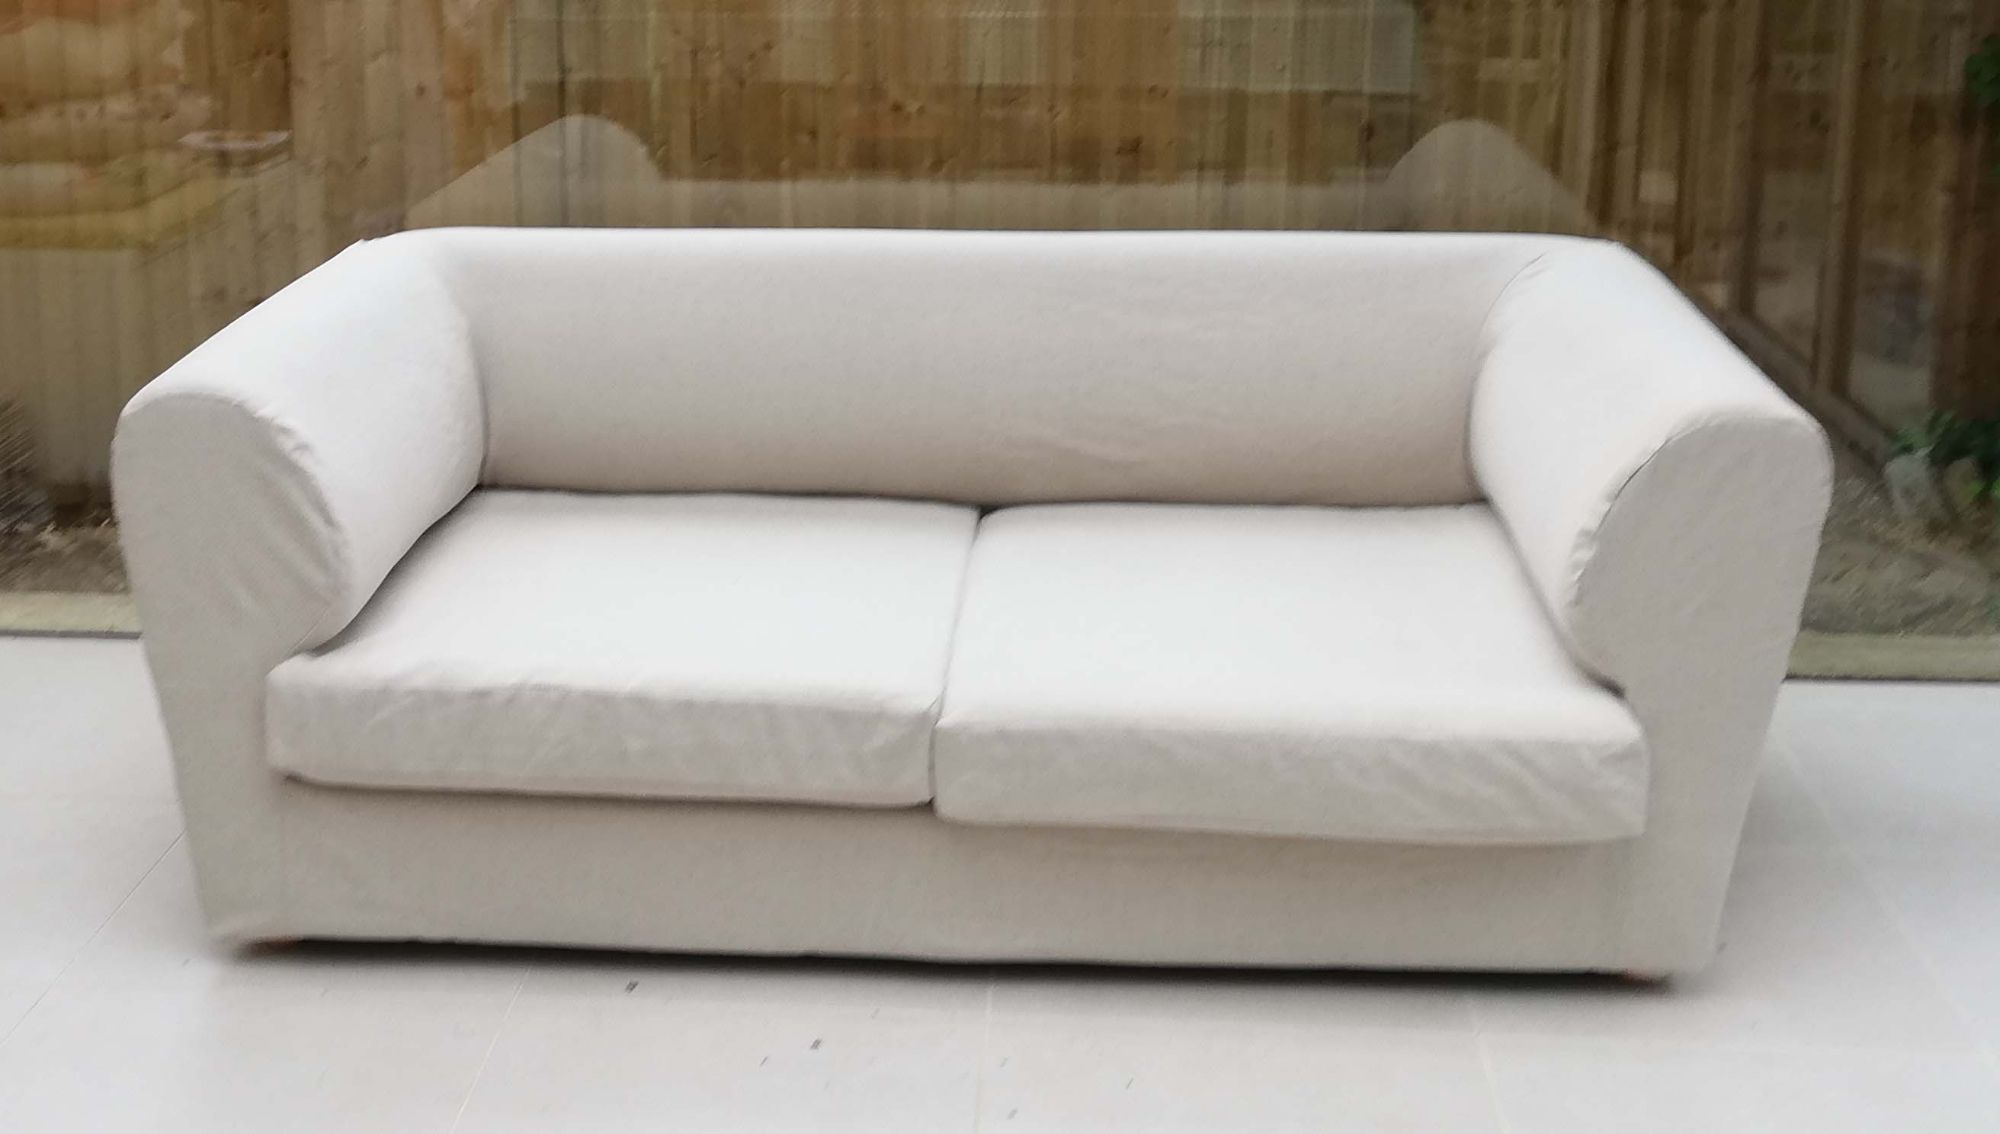 A plain sofa cover with no piping